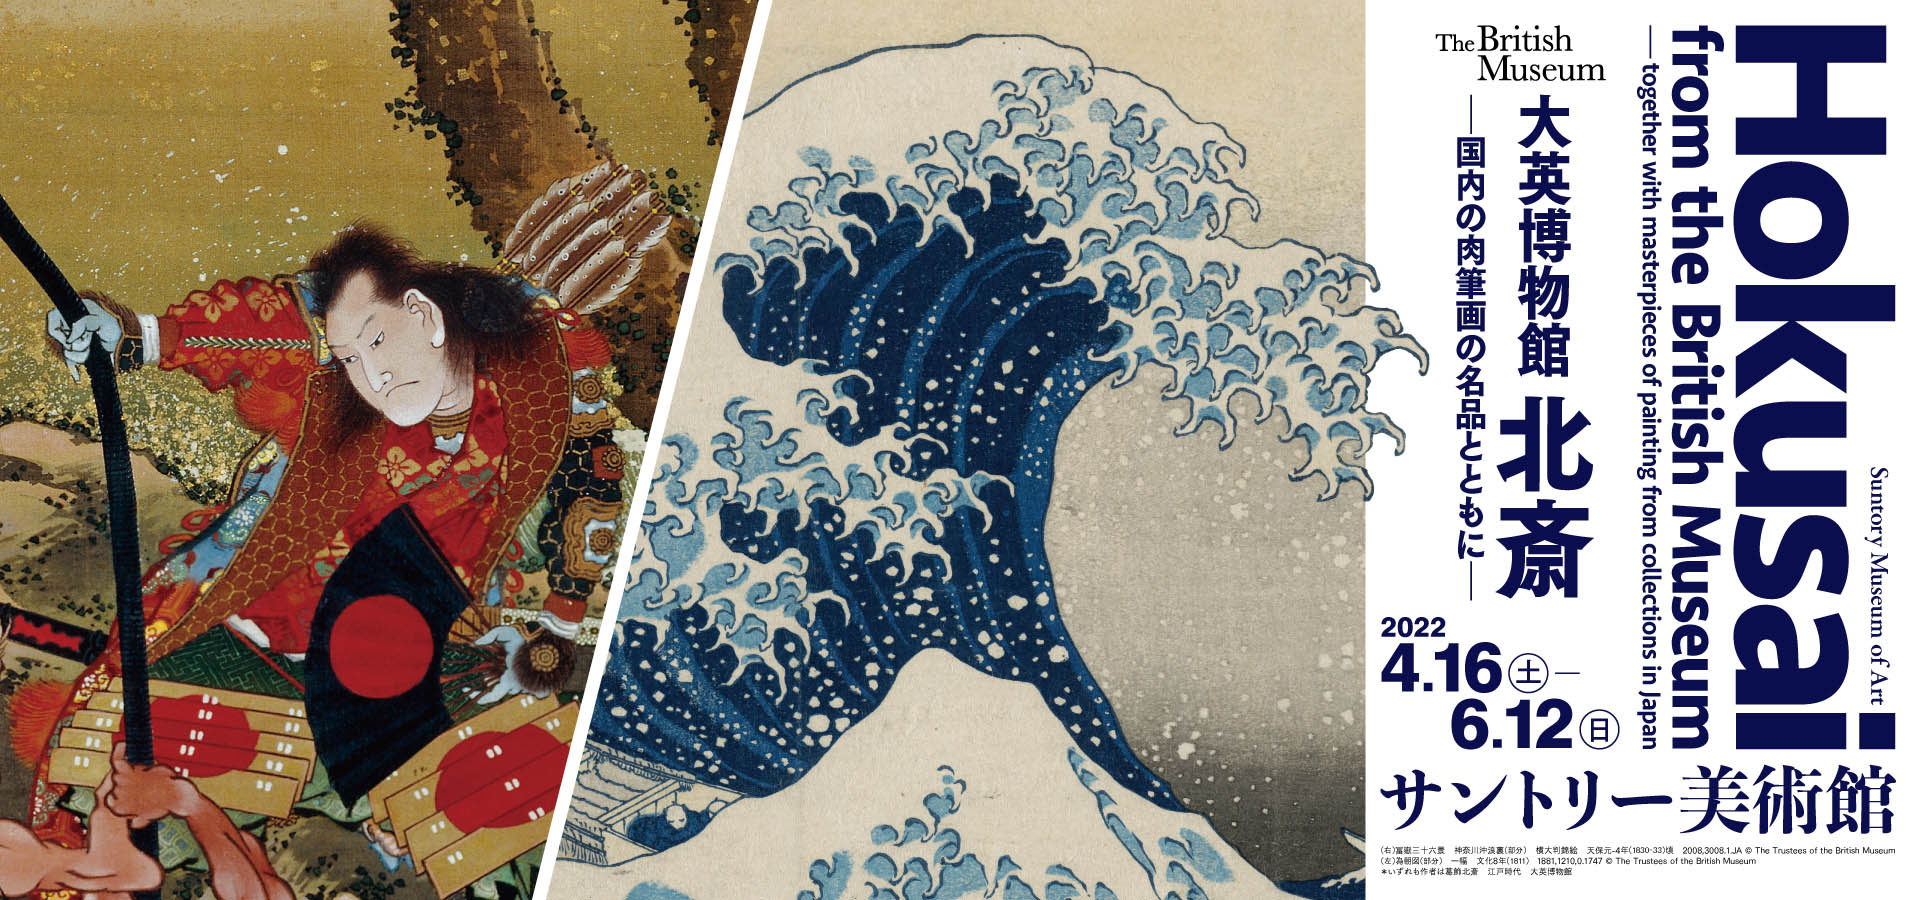 b>The Mann Collection: Exhibition of Ukiyo-e Masterpieces</b>$150</em> —  COLLECTING JAPANESE PRINTS